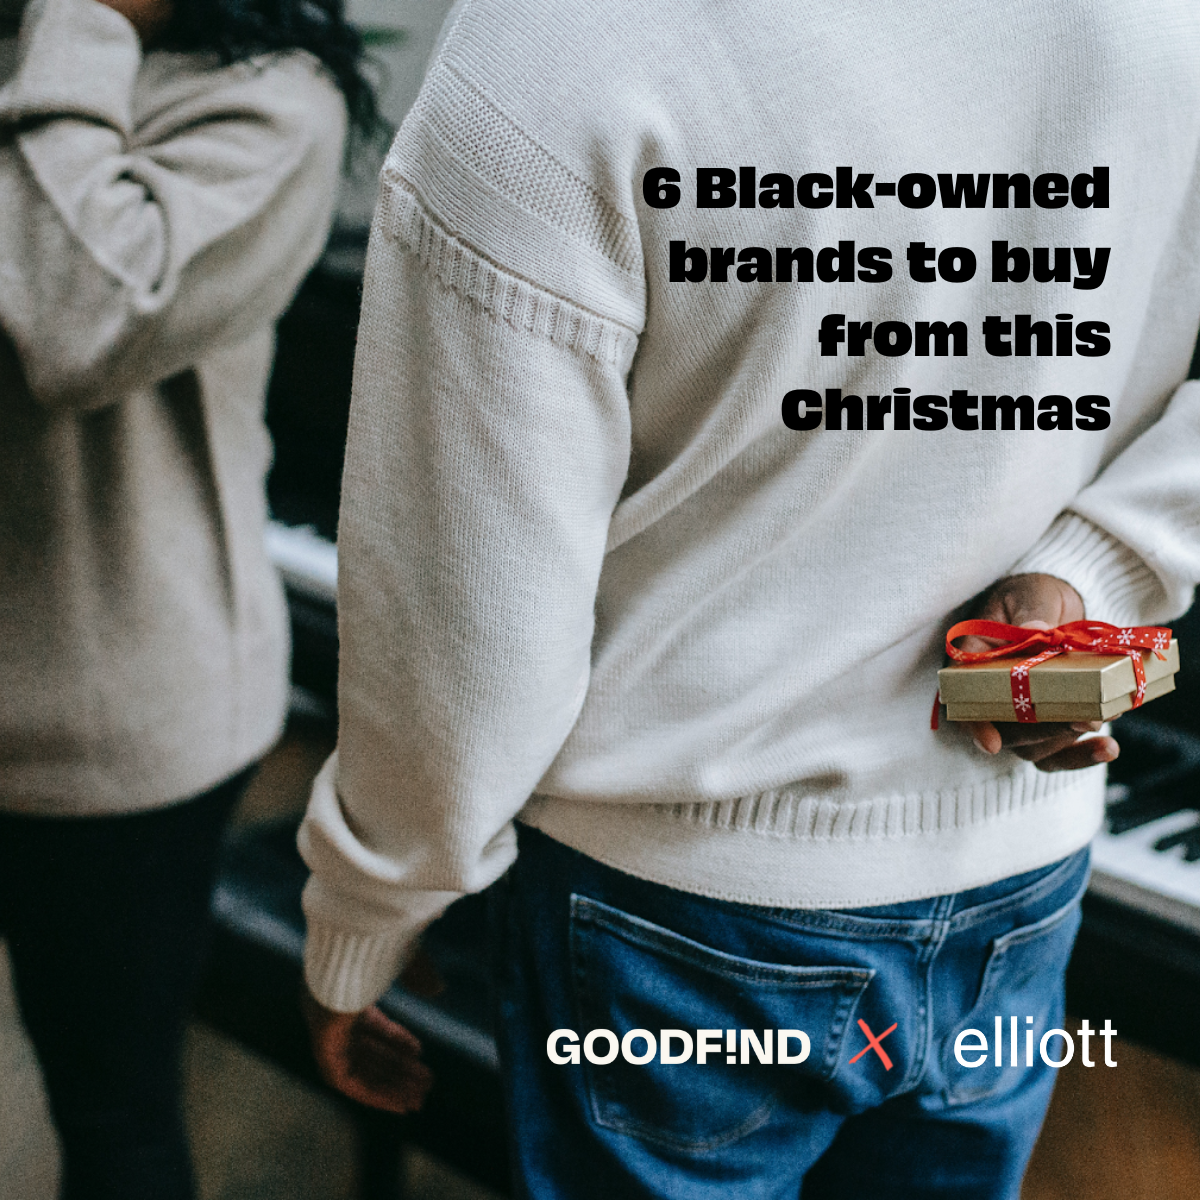 6 Black-owned brands to buy from this Christmas